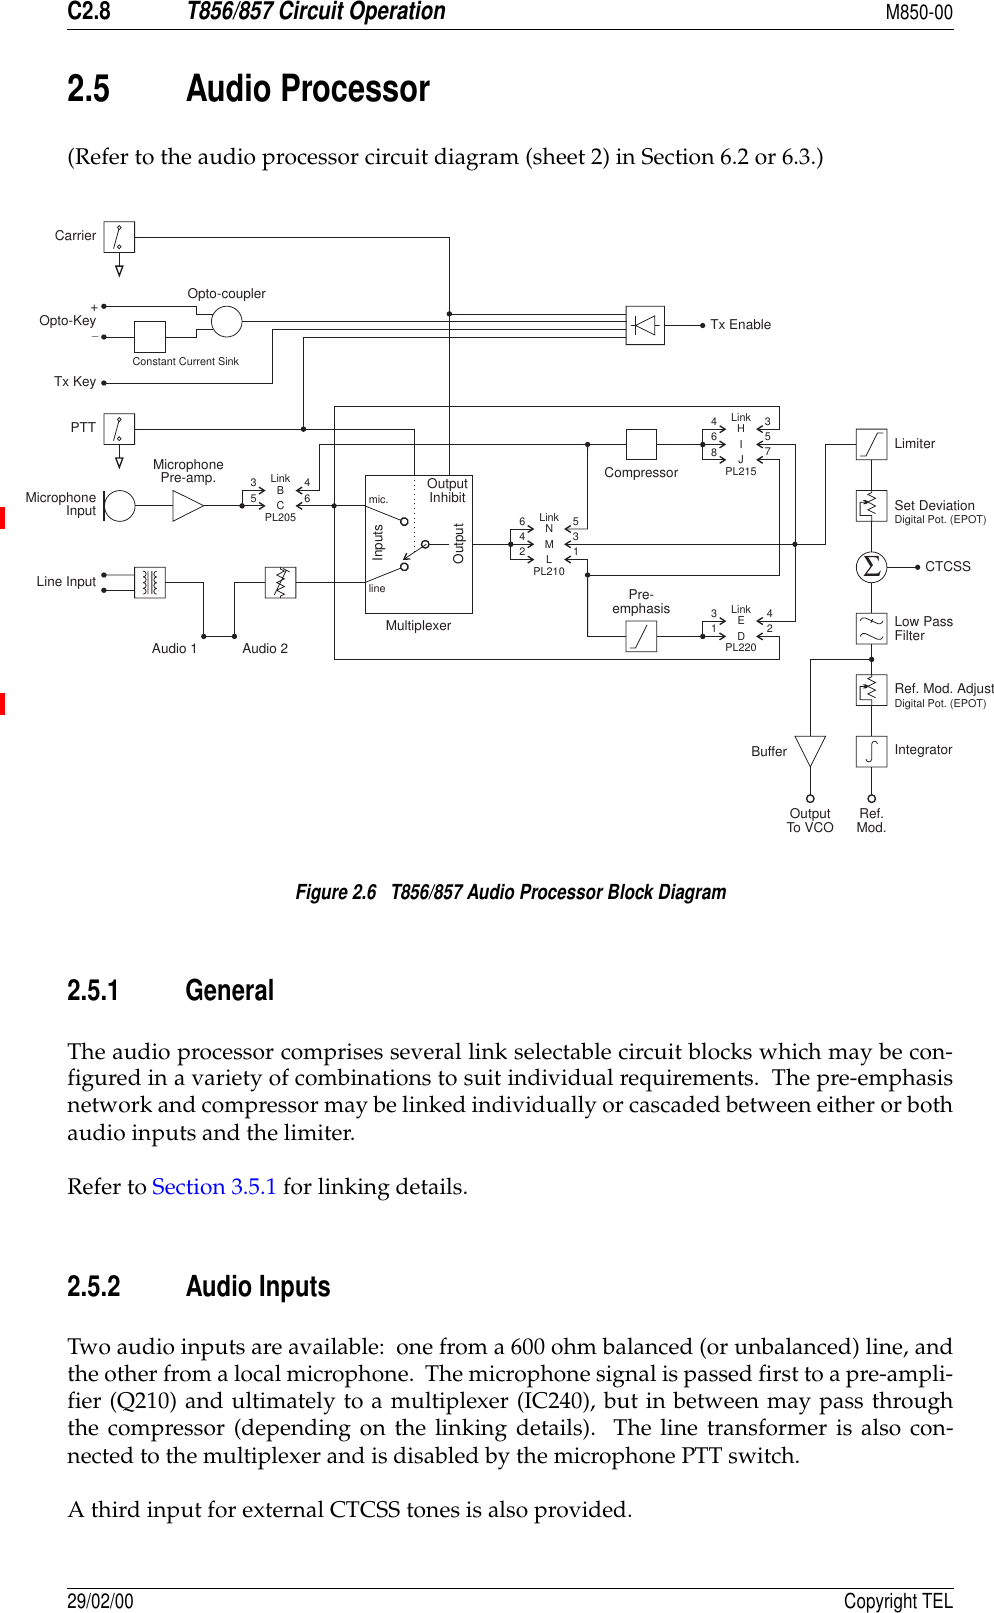 C2.8T856/857 Circuit OperationM850-0029/02/00 Copyright TEL2.5 Audio Processor(Refer to the audio processor circuit diagram (sheet 2) in Section 6.2 or 6.3.)Figure 2.6   T856/857 Audio Processor Block Diagram2.5.1 GeneralThe audio processor comprises several link selectable circuit blocks which may be con-figured in a variety of combinations to suit individual requirements.  The pre-emphasisnetwork and compressor may be linked individually or cascaded between either or bothaudio inputs and the limiter.Refer to Section 3.5.1 for linking details.2.5.2 Audio InputsTwo audio inputs are available:  one from a 600 ohm balanced (or unbalanced) line, andthe other from a local microphone.  The microphone signal is passed first to a pre-ampli-fier (Q210) and ultimately to a multiplexer (IC240), but in between may pass throughthe compressor (depending on the linking details).  The line transformer is also con-nected to the multiplexer and is disabled by the microphone PTT switch.A third input for external CTCSS tones is also provided.Pre-emphasis346BC56434253357128NHMIELJD461mic.lineMultiplexerInputsOutputOutputInhibitAudio 1 Audio 2CompressorLinkLinkLinkTx EnableΣCarrierOpto-KeyTx KeyPTTMicrophoneInputLine InputMicrophonePre-amp.Opto-couplerLinkPL205PL215PL220PL210LimiterSet DeviationCTCSSLow PassFilterRef. Mod. AdjustIntegratorDigital Pot. (EPOT)Digital Pot. (EPOT)BufferOutputTo VCO Ref.Mod.Constant Current Sink+_